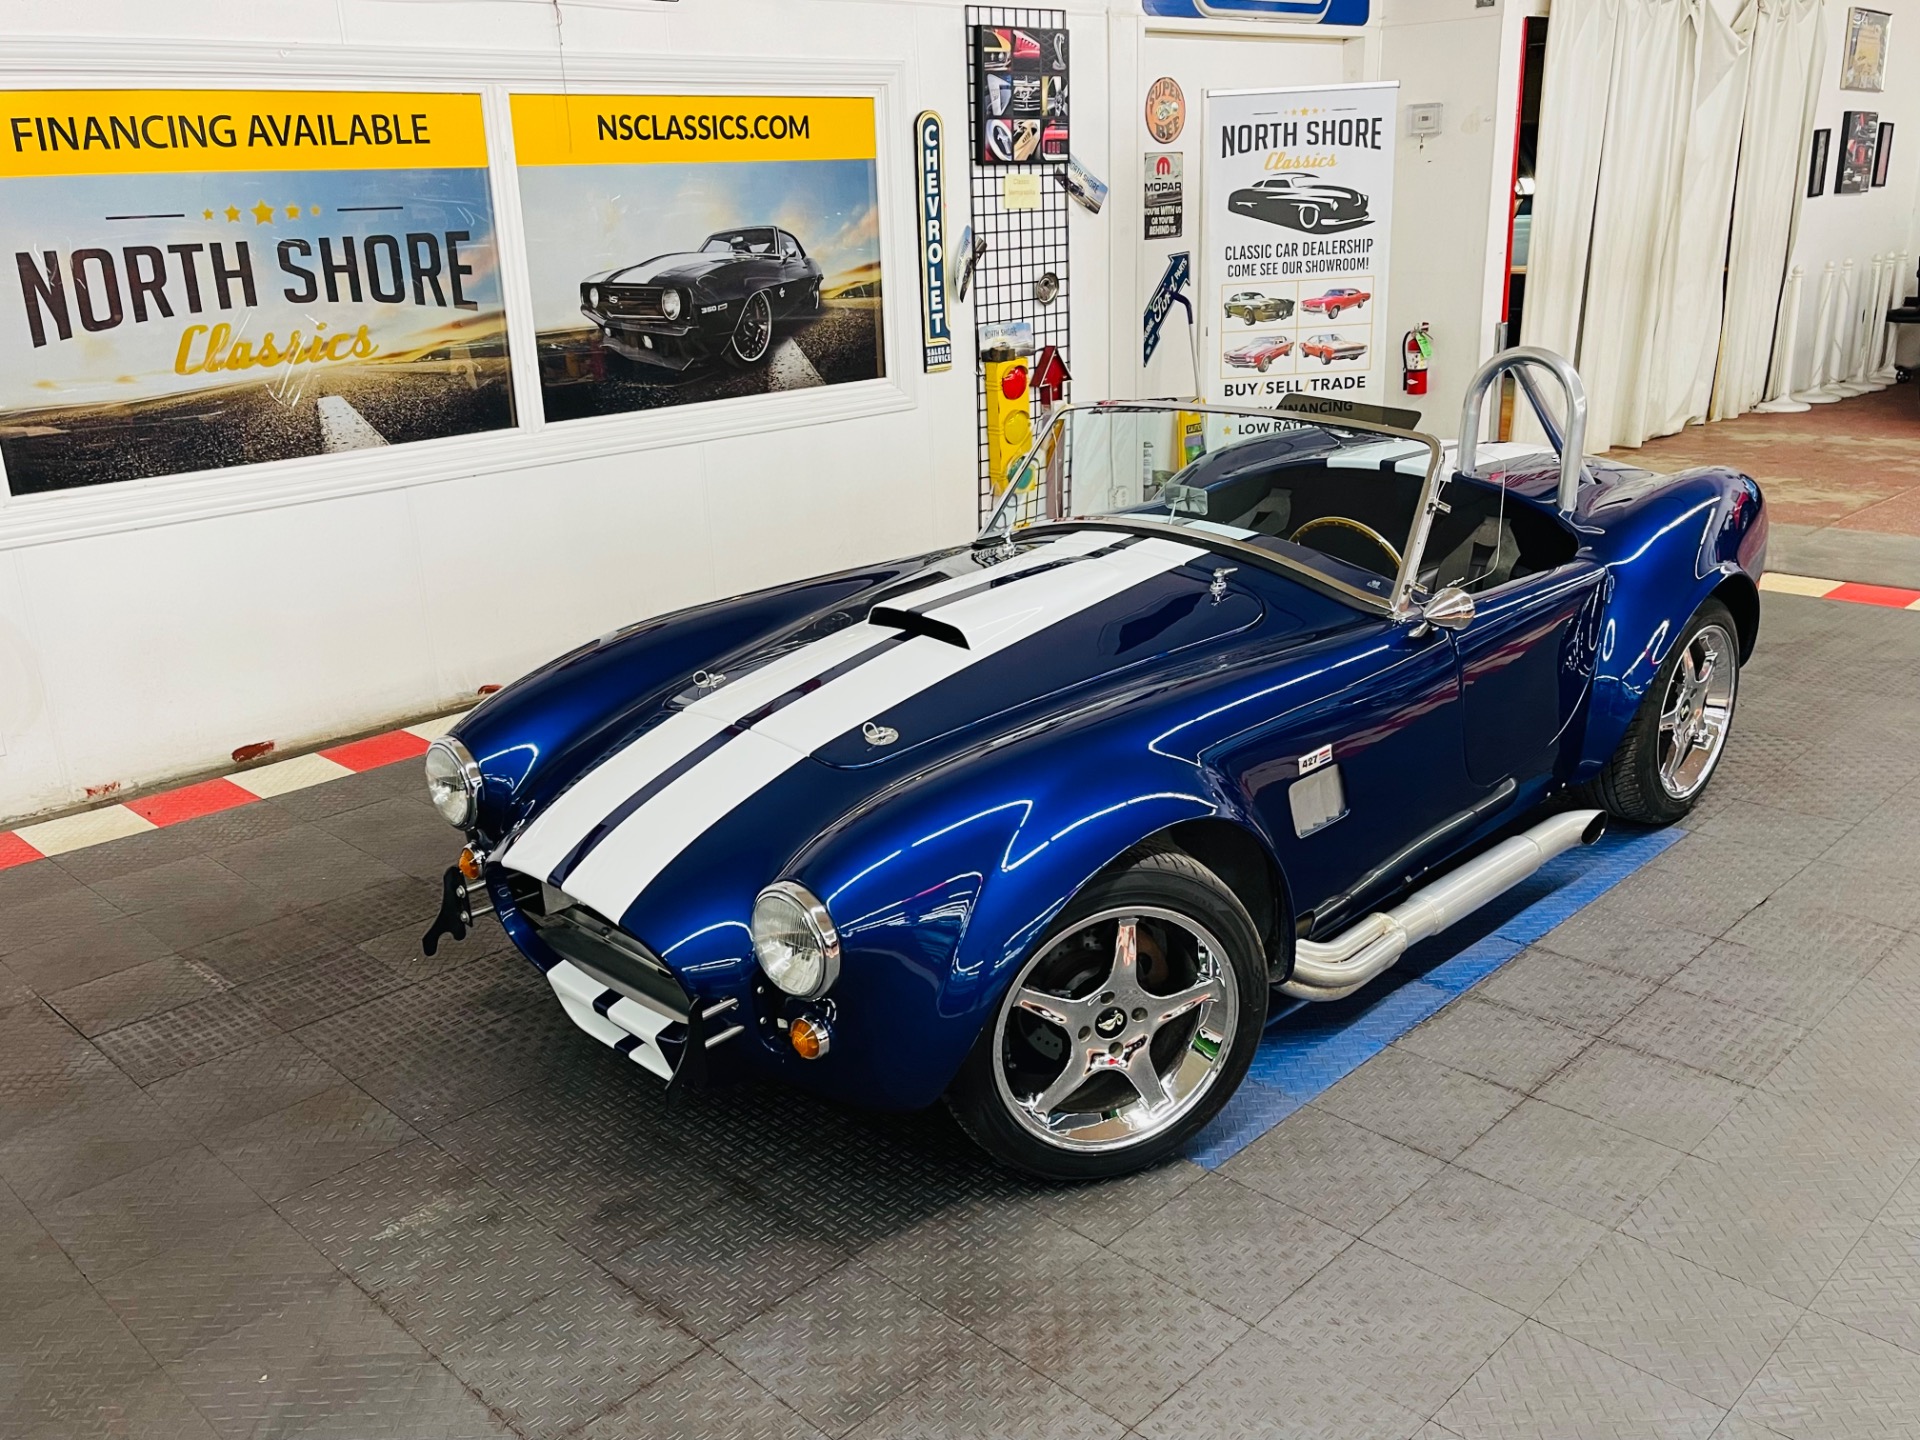 Used 1965 Shelby Cobra - TRIBUTE - FACTORY FIVE RACING VIDEO For Sale ($38,900) | North Shore Classics #65109NSC